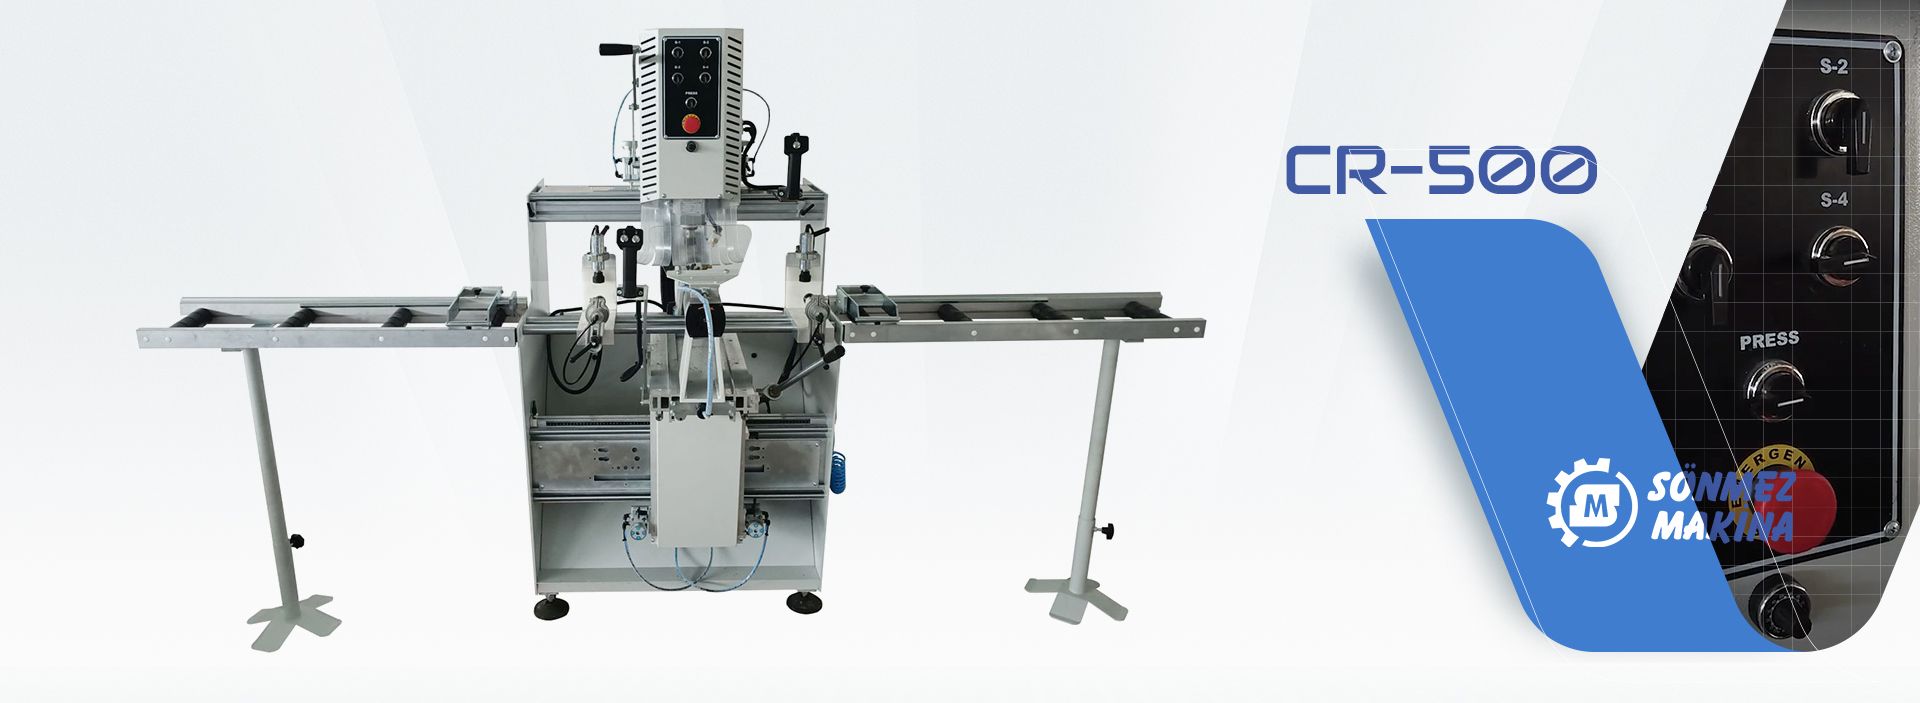 Copy Router Machines CR-500 CR-500